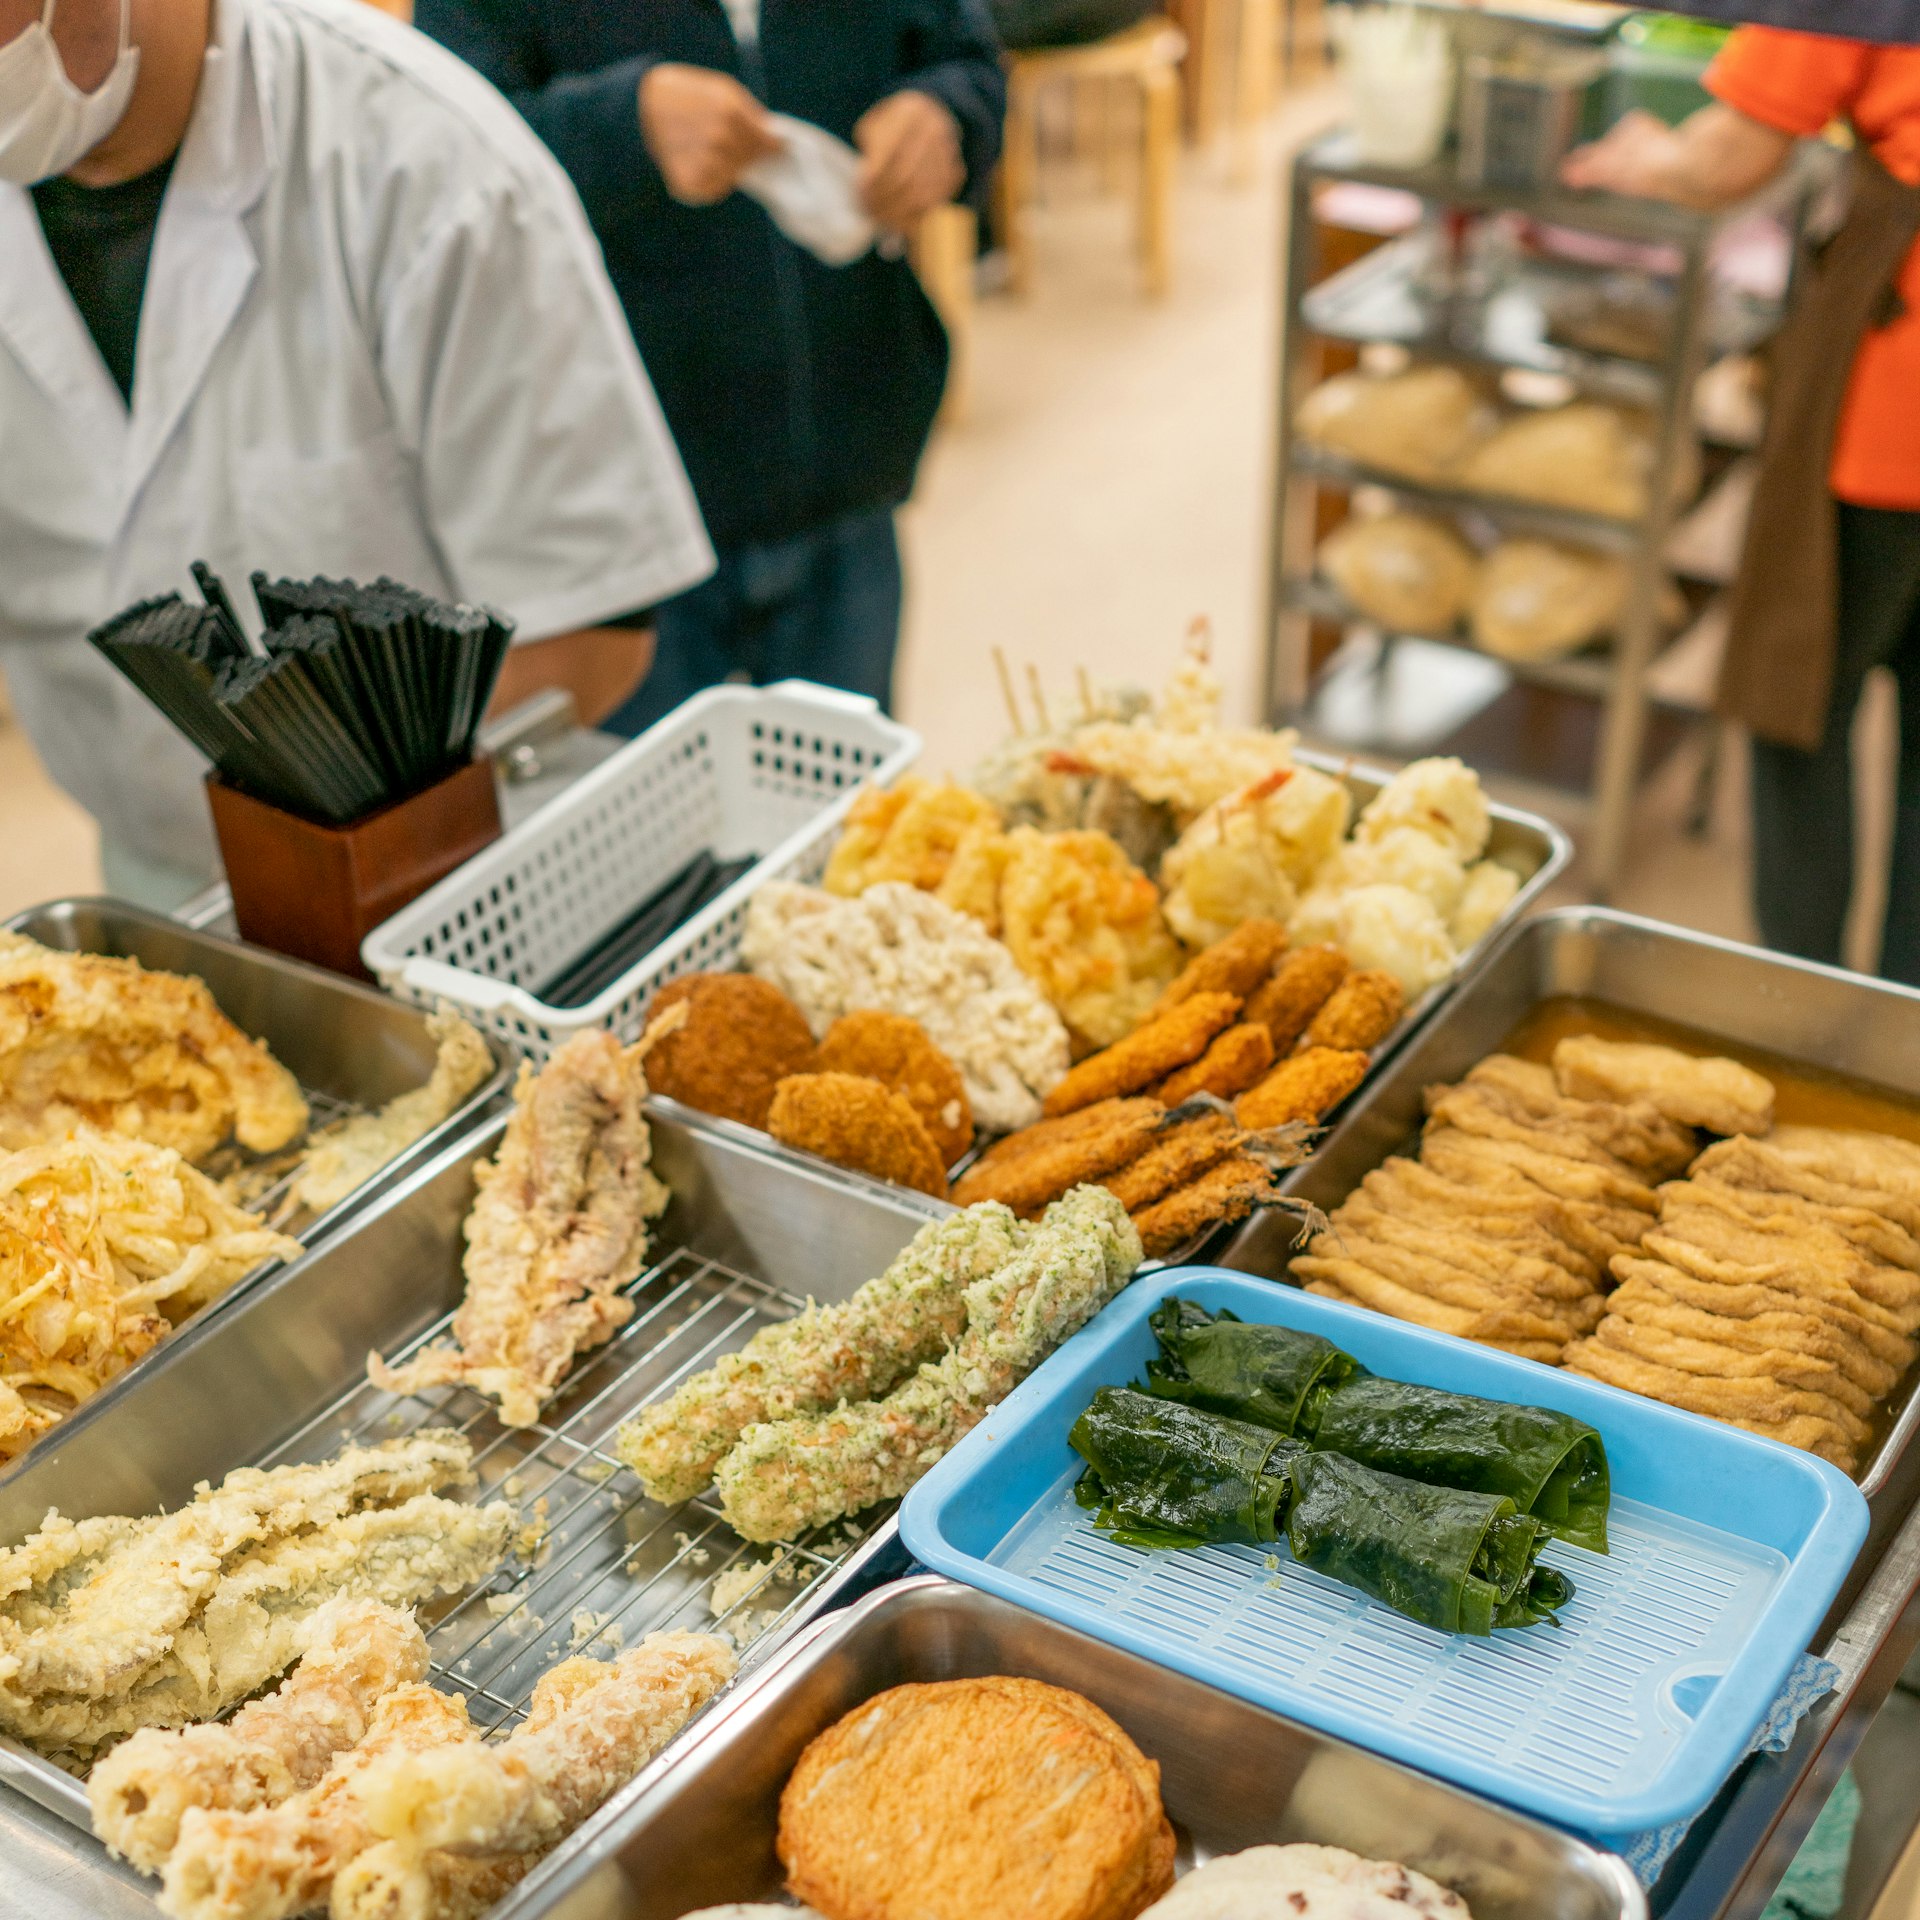 A selection of toppings and sides for udon, including freshly fried tempura